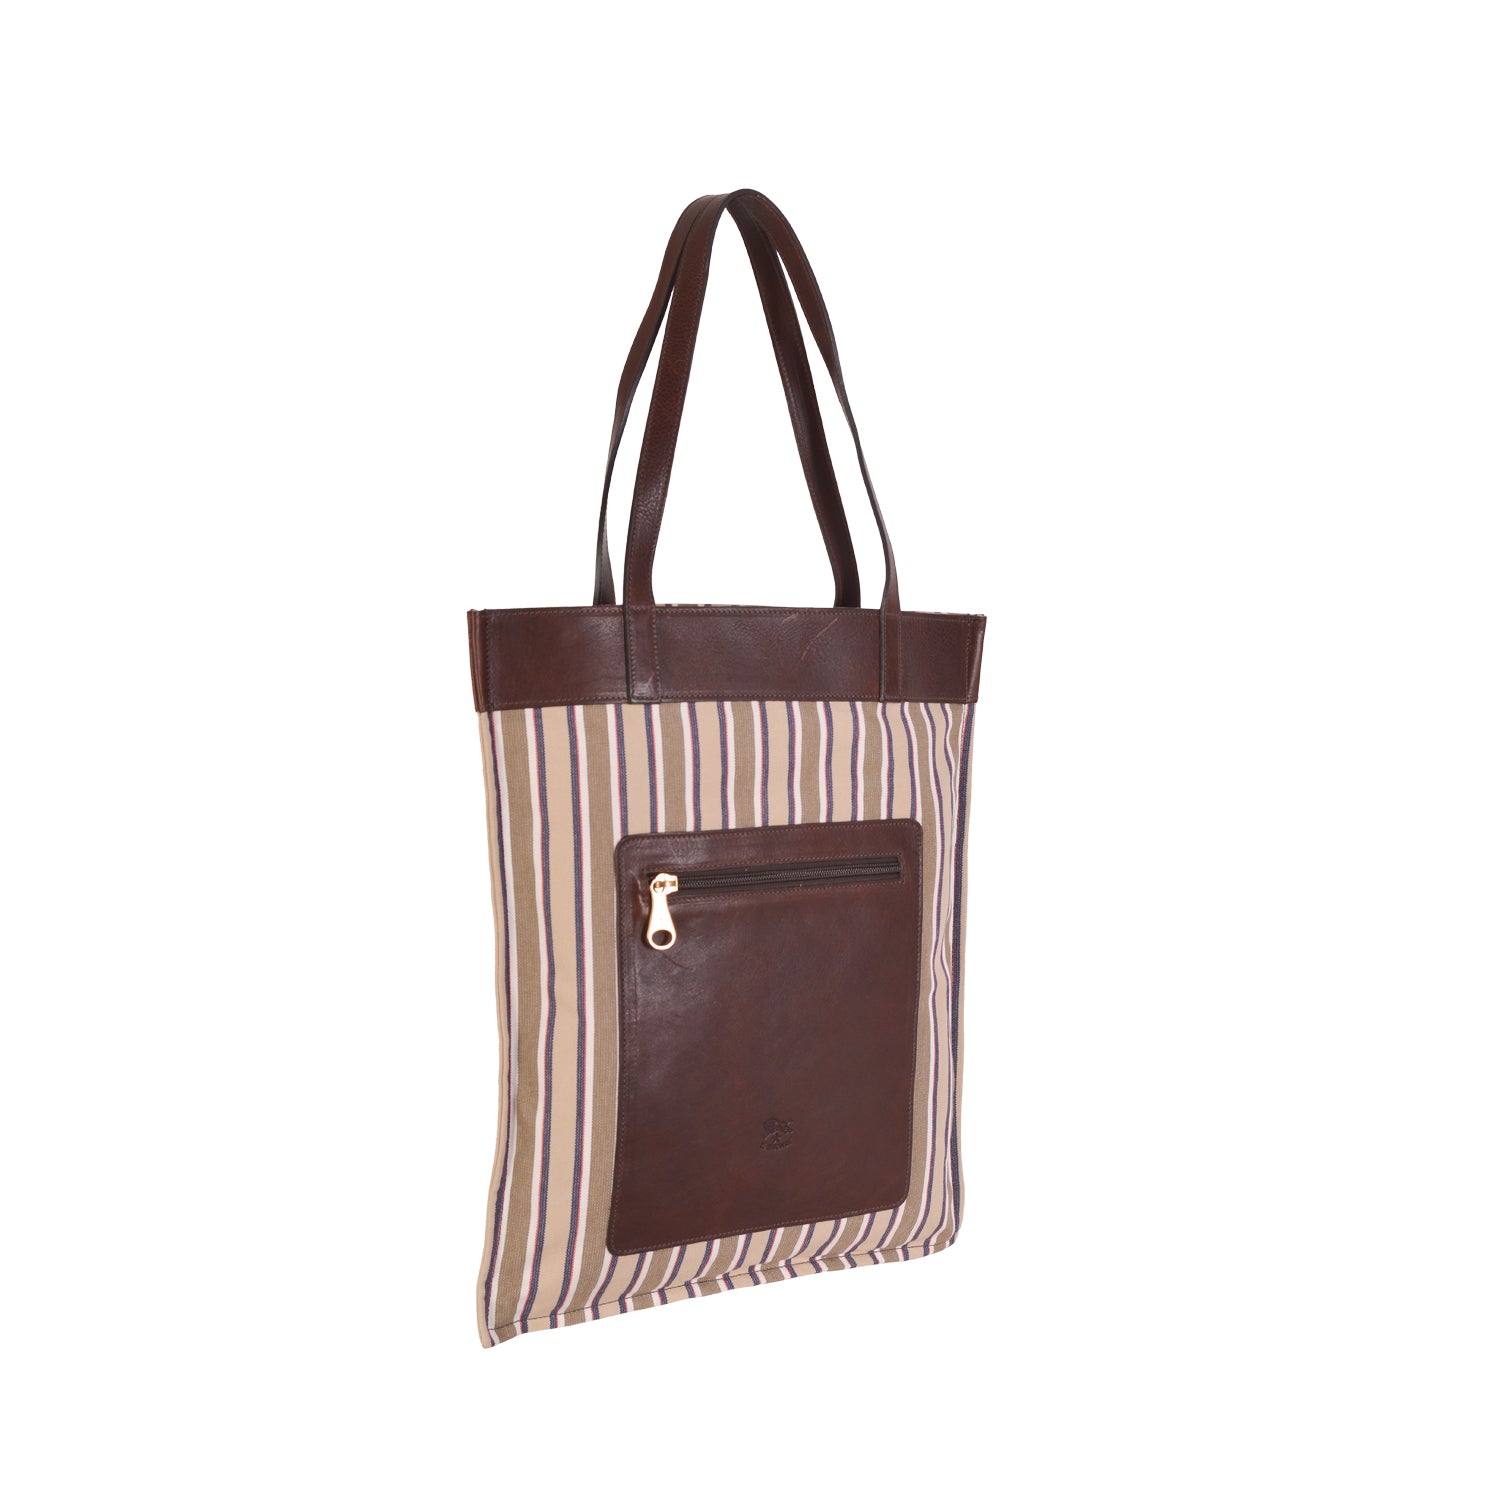 NEW IL BISONTE WOMEN'S FLAT TOTE BAG  IN BROWN STRIPED COTTON CANVAS